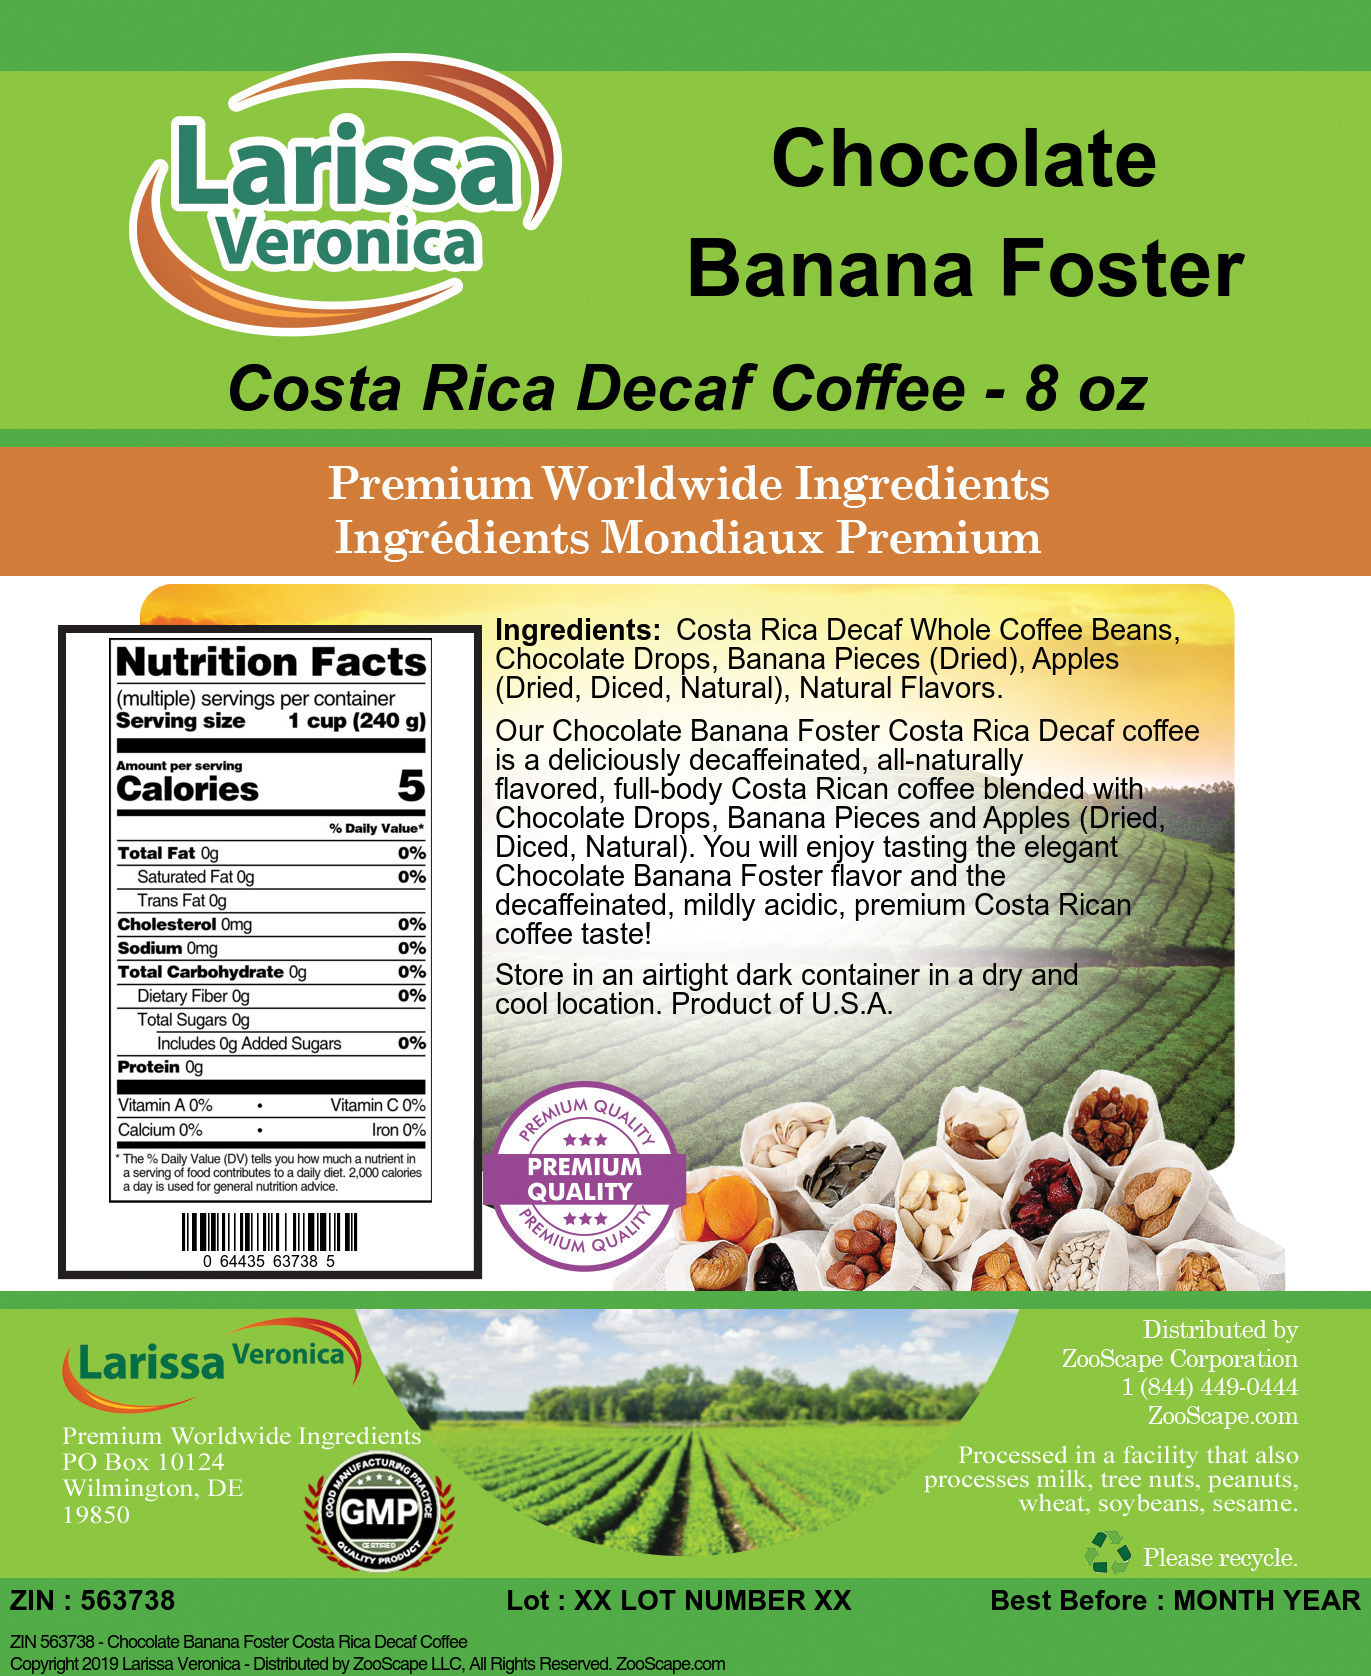 Chocolate Banana Foster Costa Rica Decaf Coffee - Label